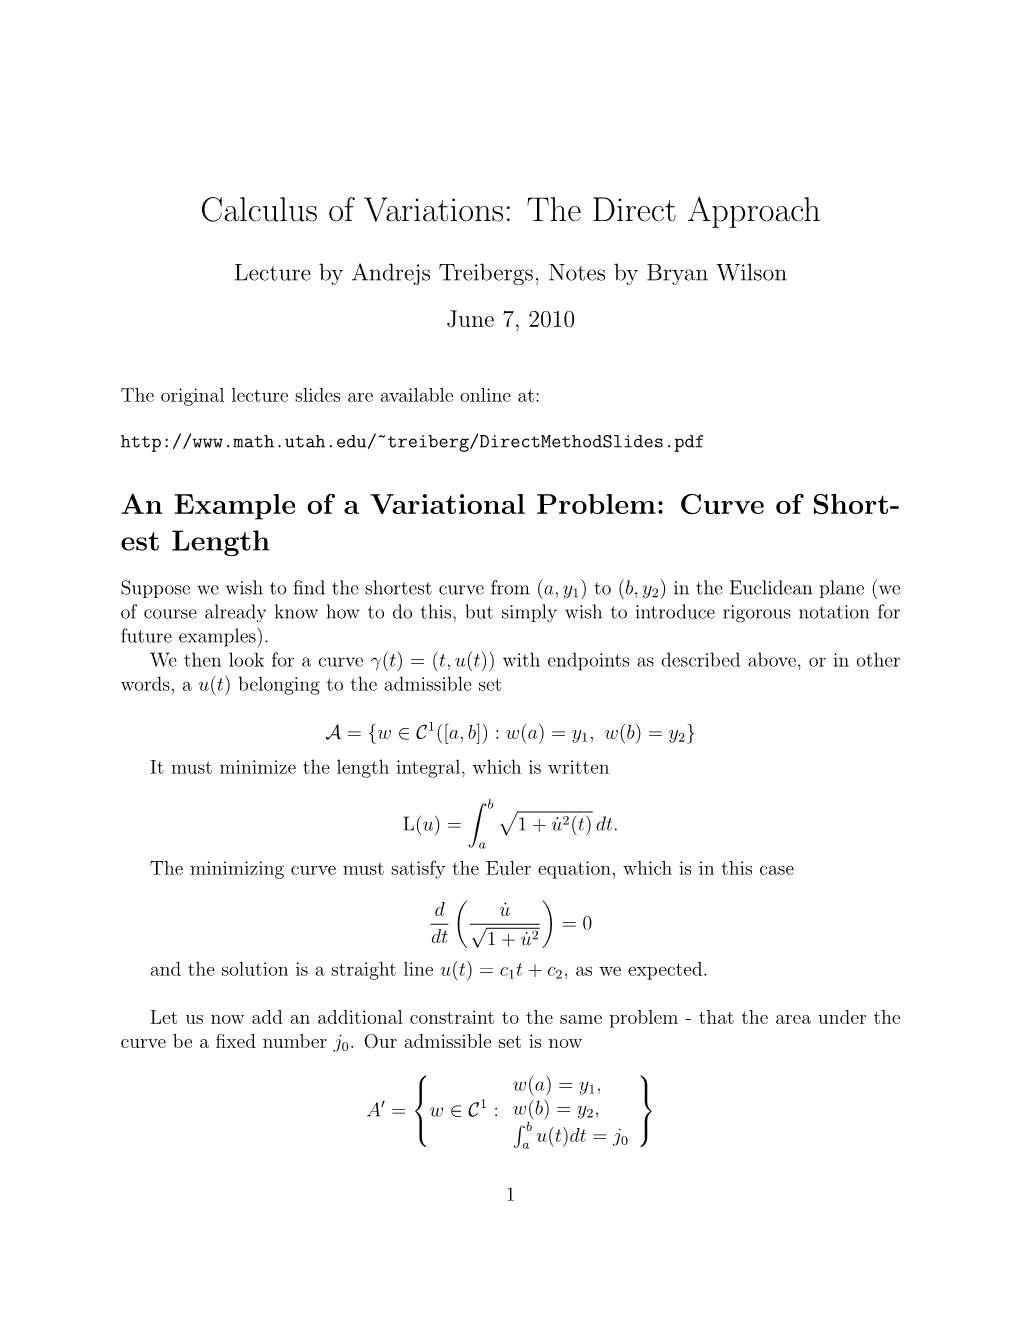 Calculus of Variations: the Direct Approach